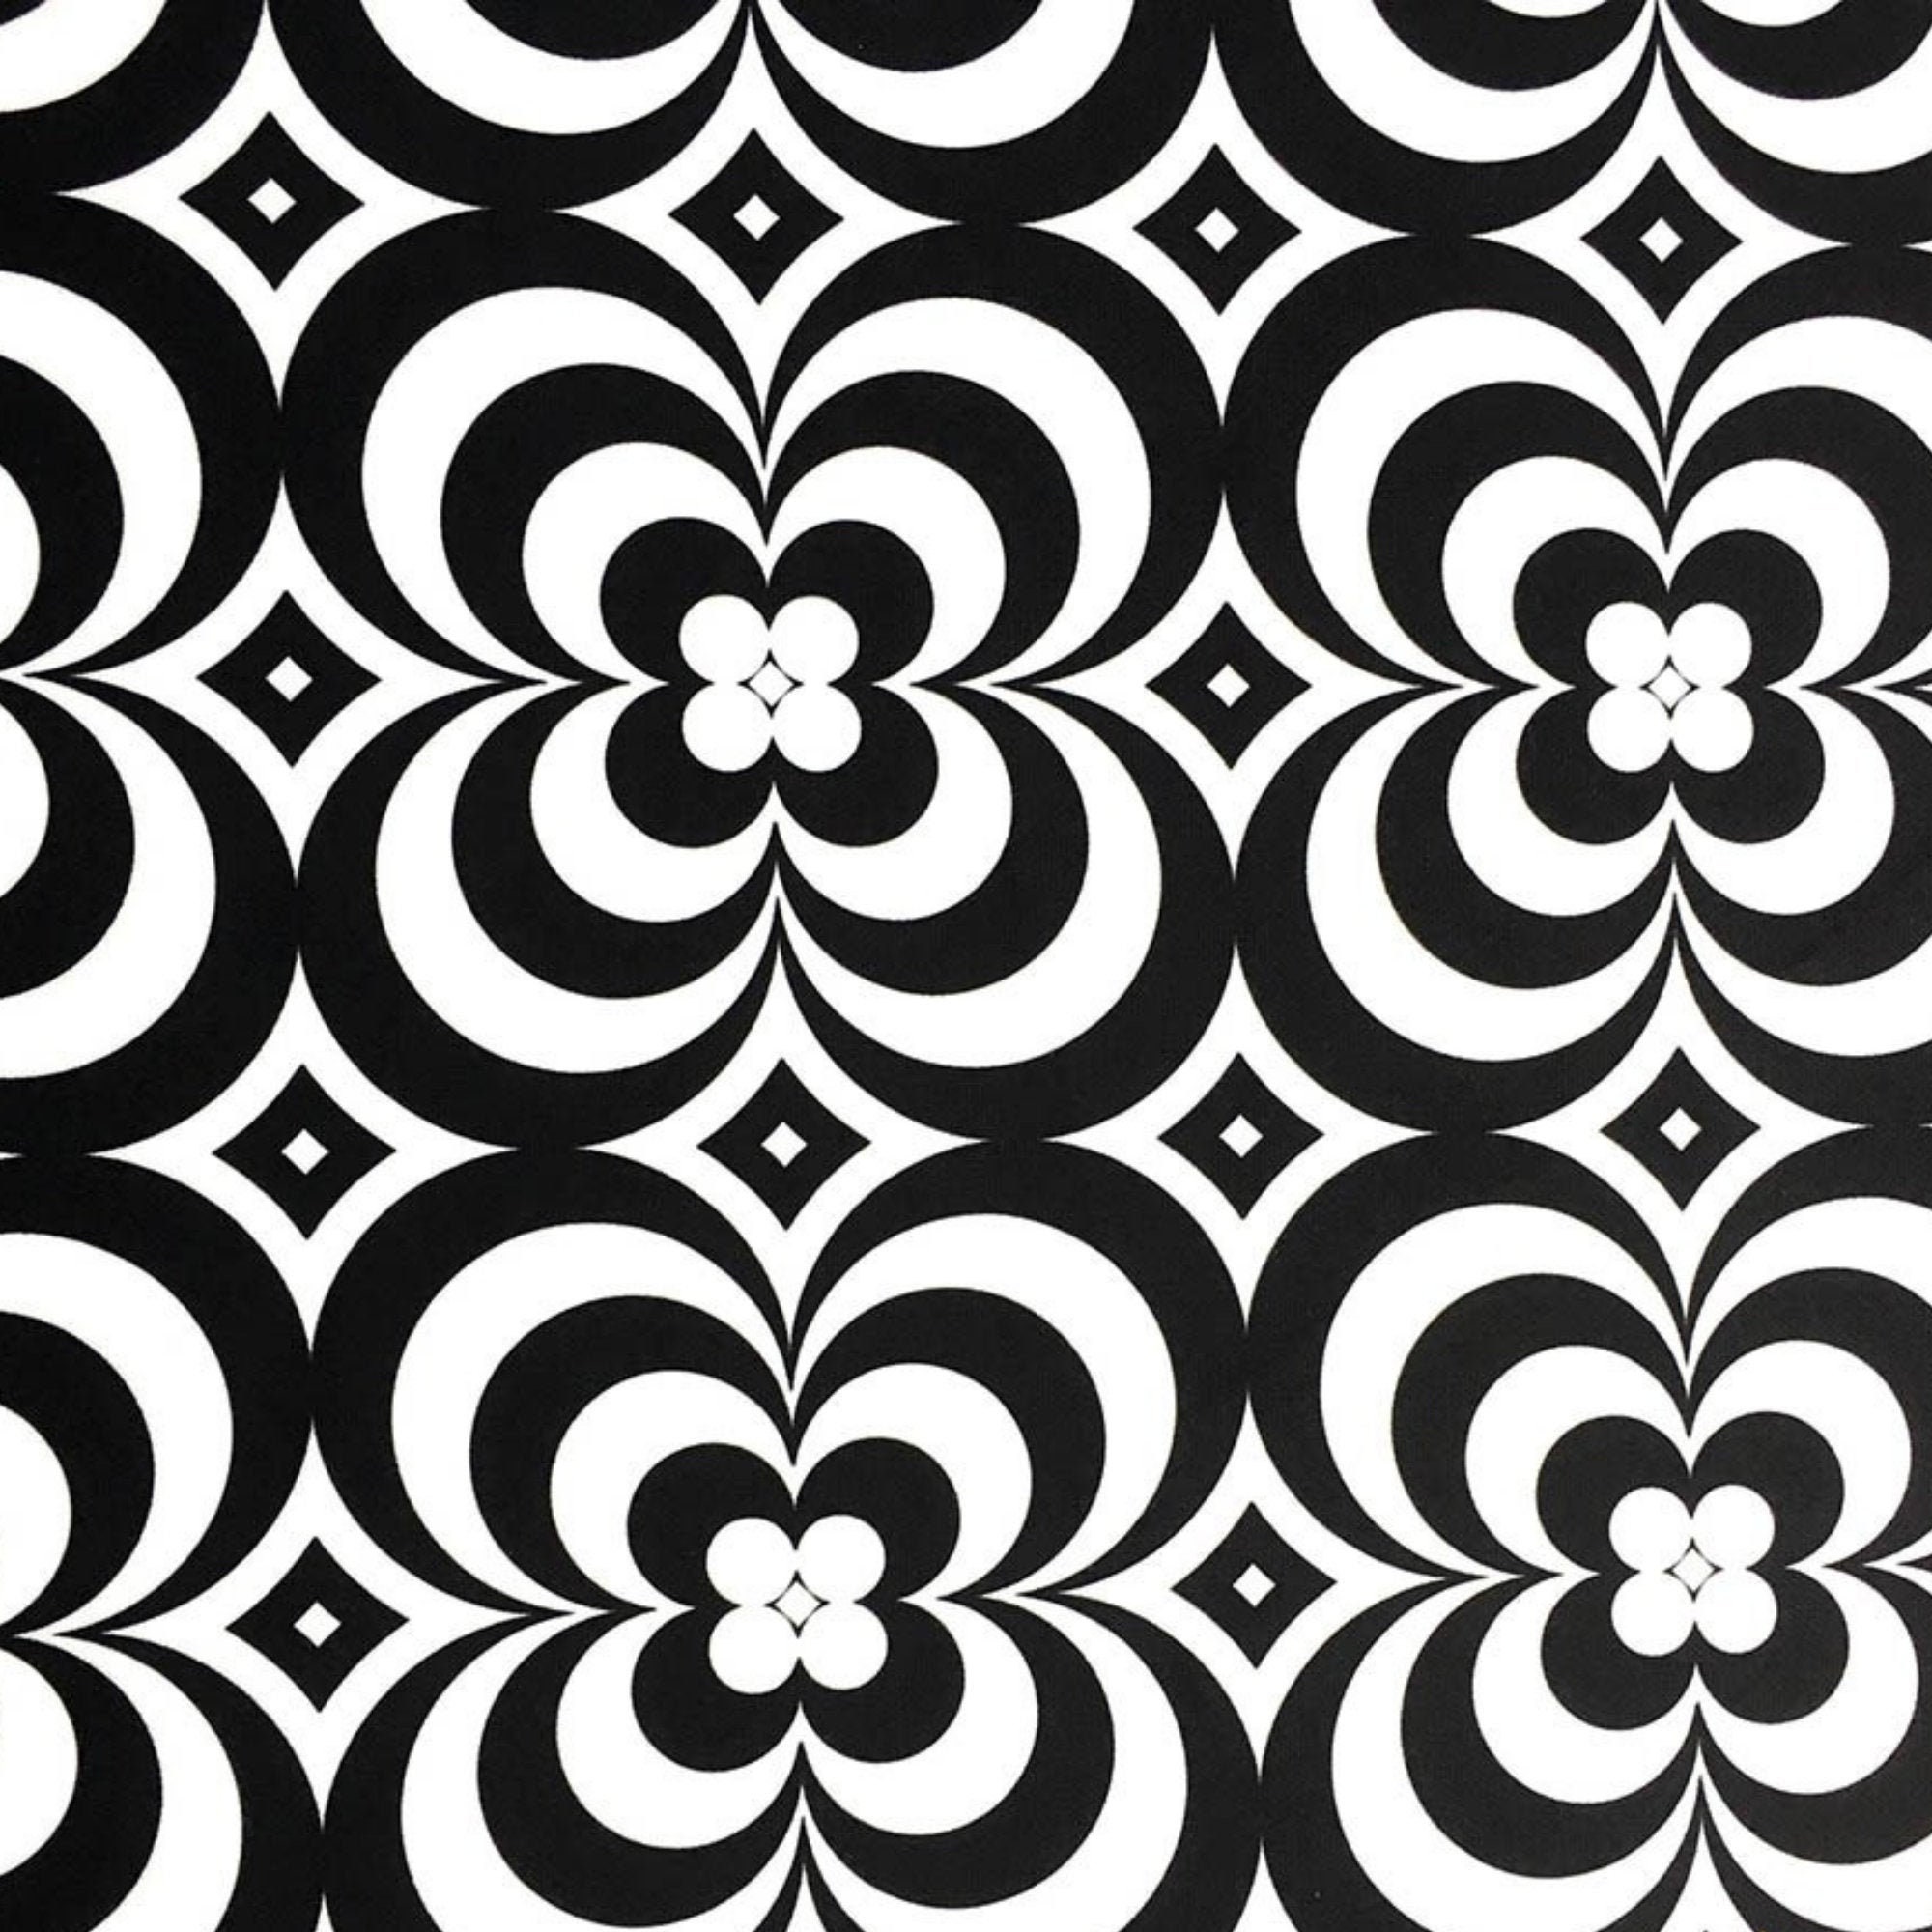 Black and White Retro Fabric, Groovy Geometric Print 70s Fabric, Vintage  Style Home Decor Drapery Furniture Upholstery Fabric by the Yard -   Finland